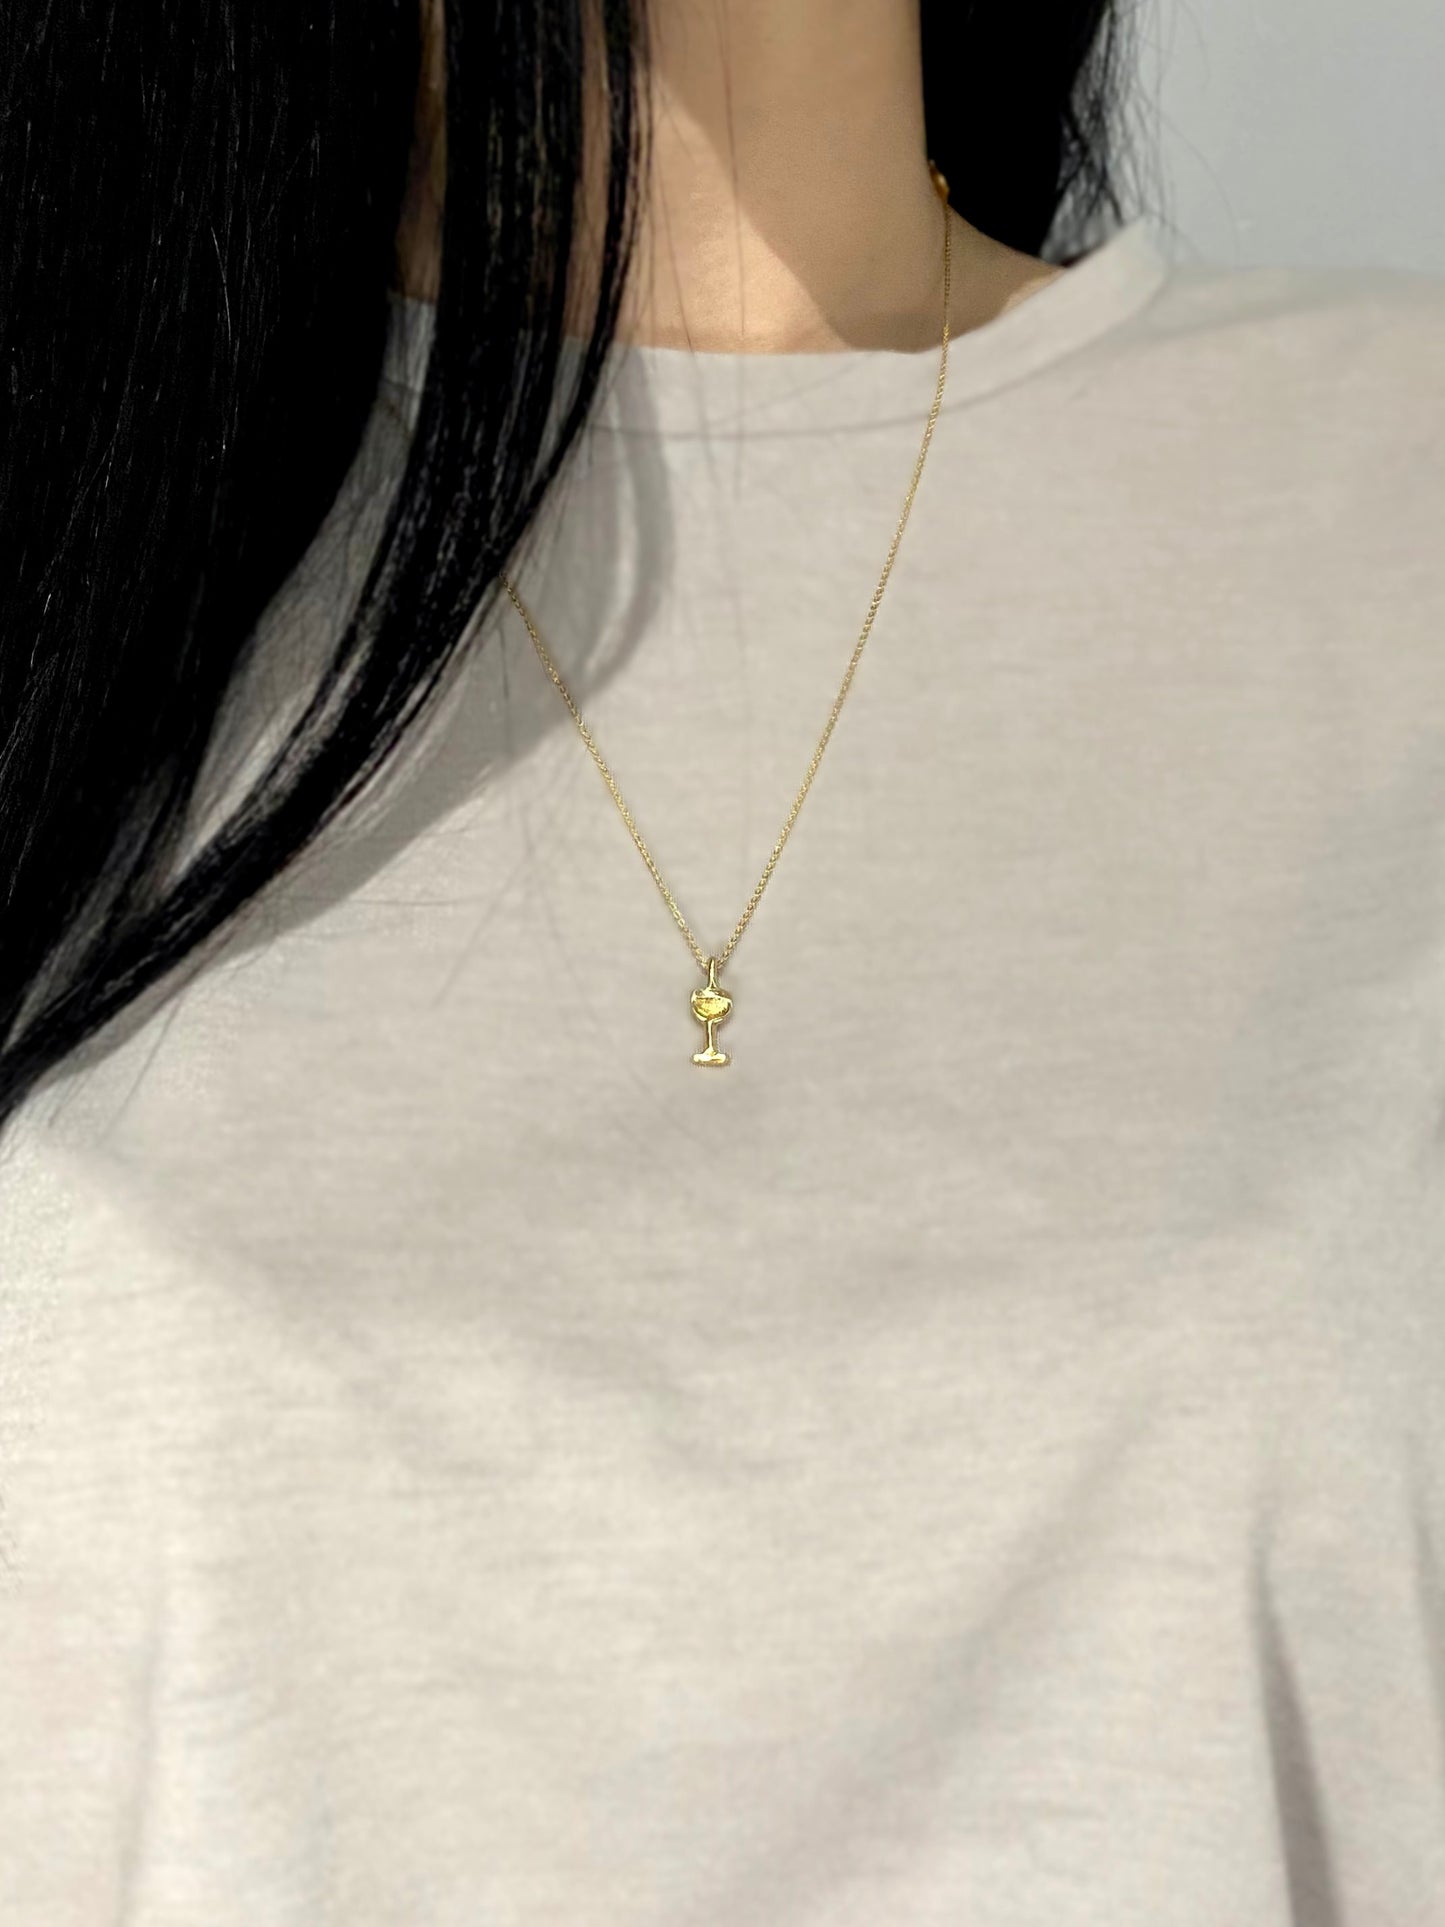 Gold wine glass necklace on model with grey shirt